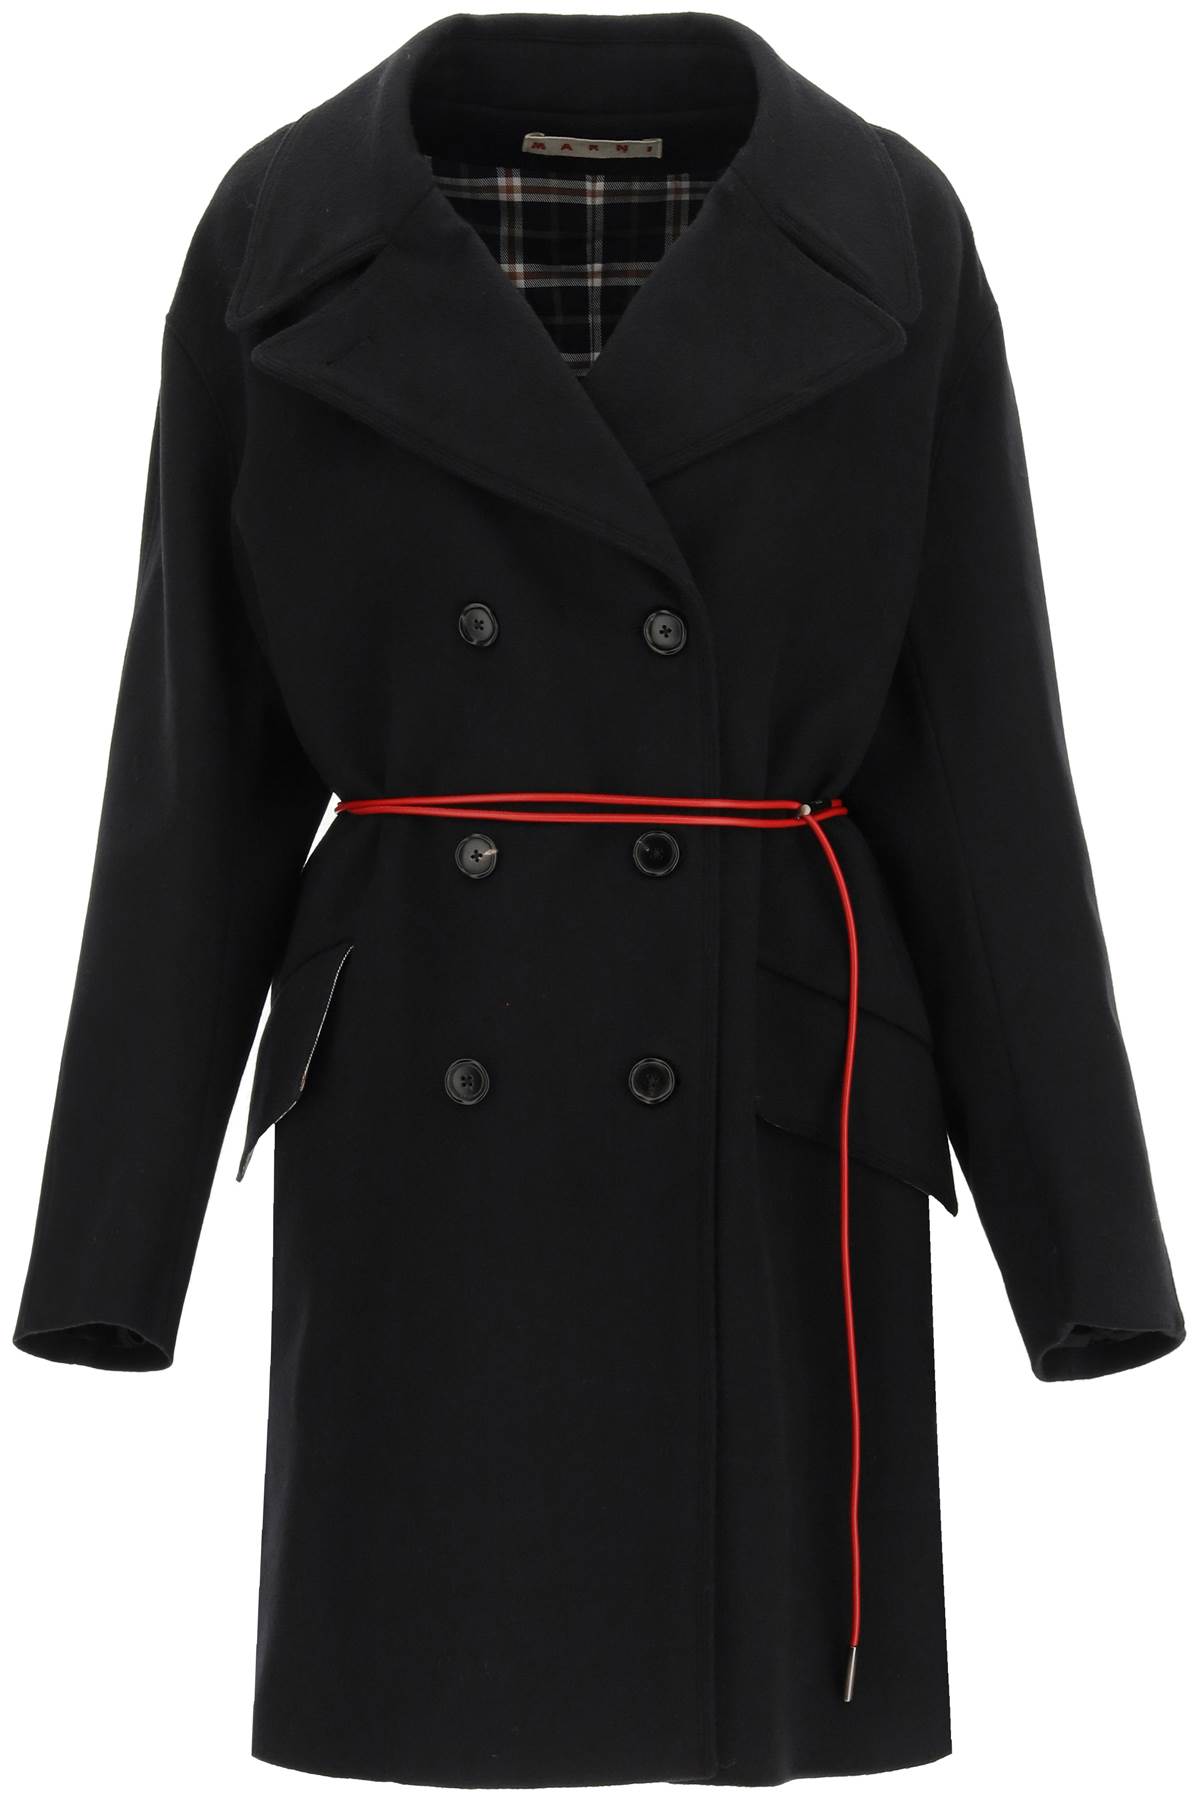 Marni Wool And Cashmere Pea Coat With Belt